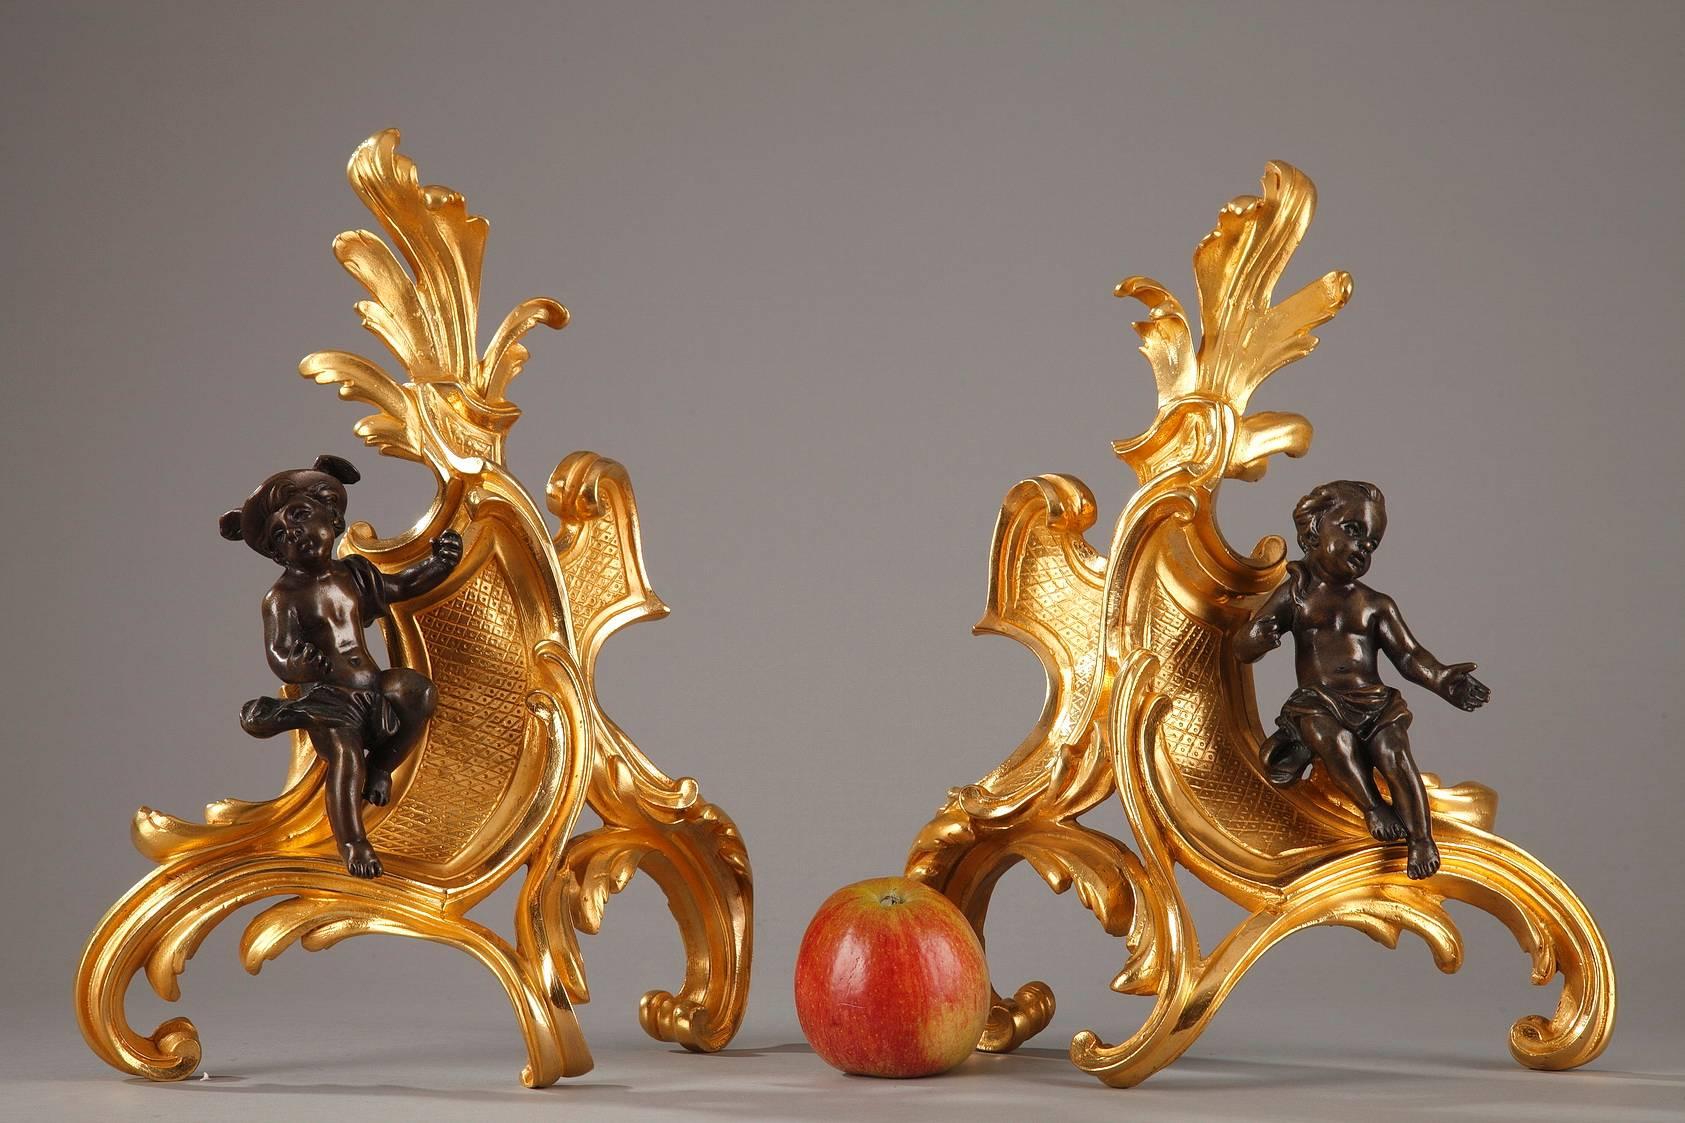 Pair of gilt and patinated bronze andirons decorated with Hermes and Herse. Both figures are represented as children with Hermes (Mercury in Roman mythology) wearing his winged hat looking away from Herse (the daughter of the Athenian king Cecrops),